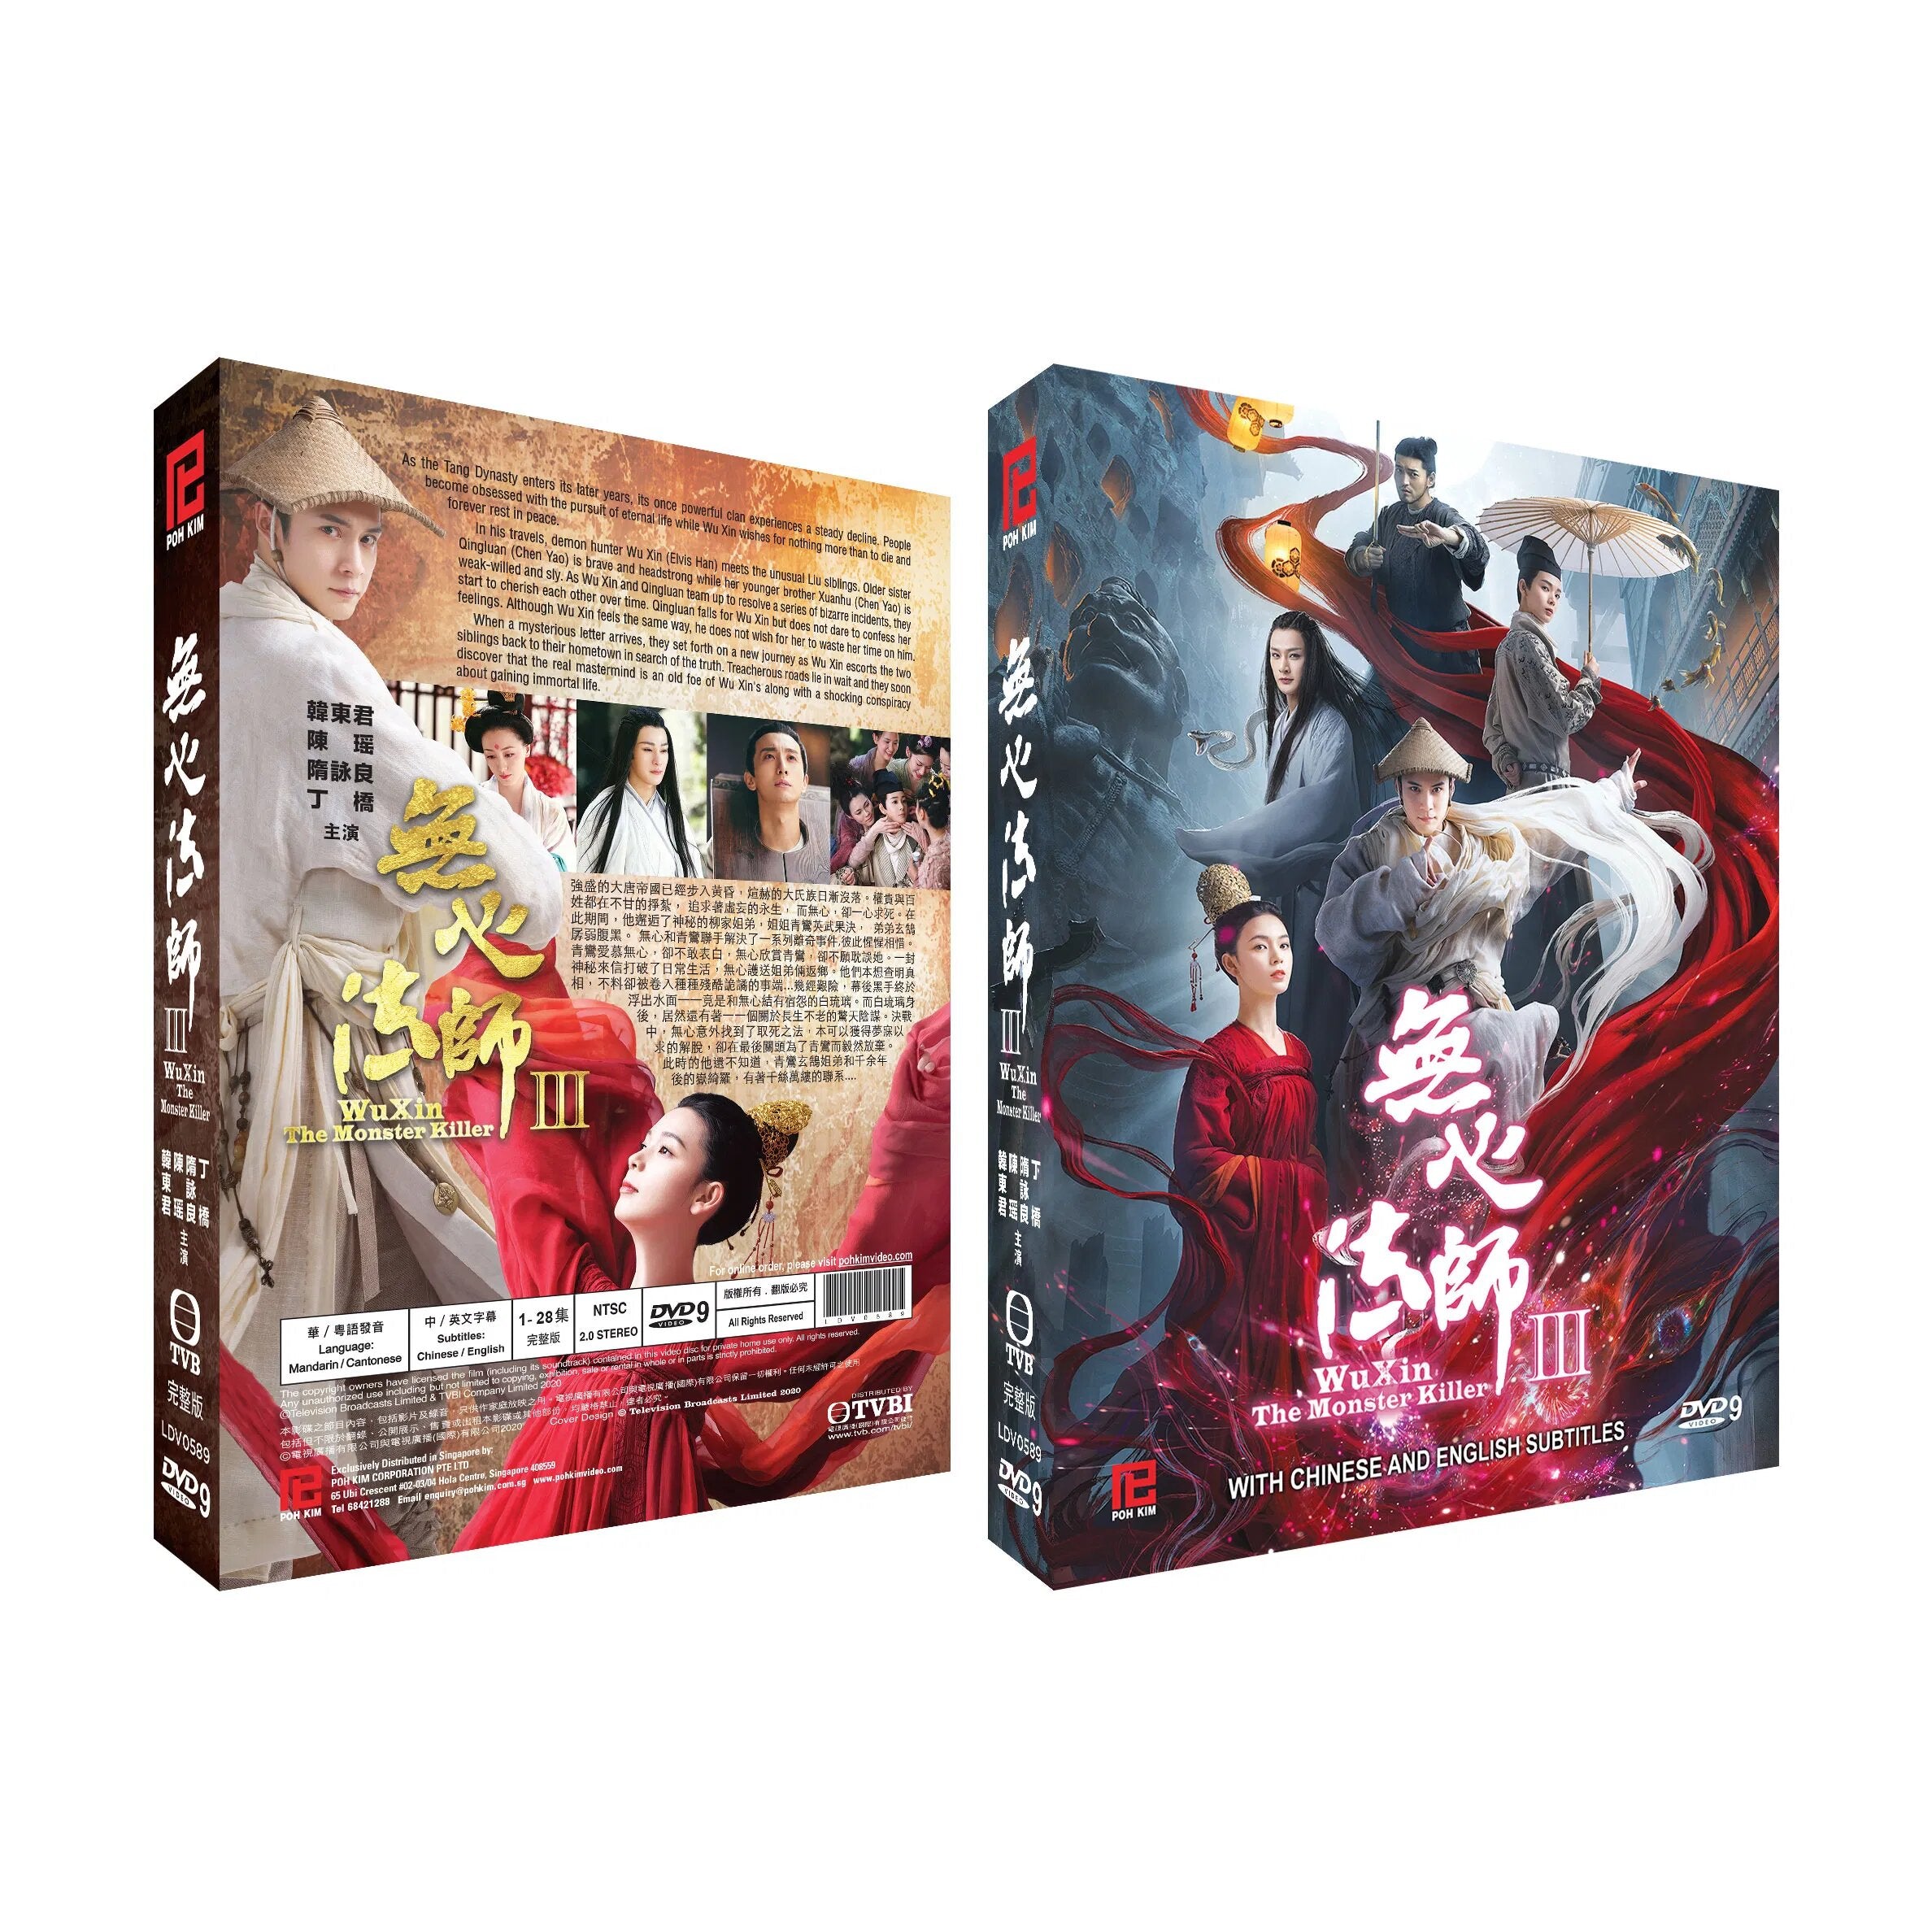 Mega Bazaar: WU XIN THE MONSTER KILLER 3 Chinese Movie DVD with Chinese Subtitles